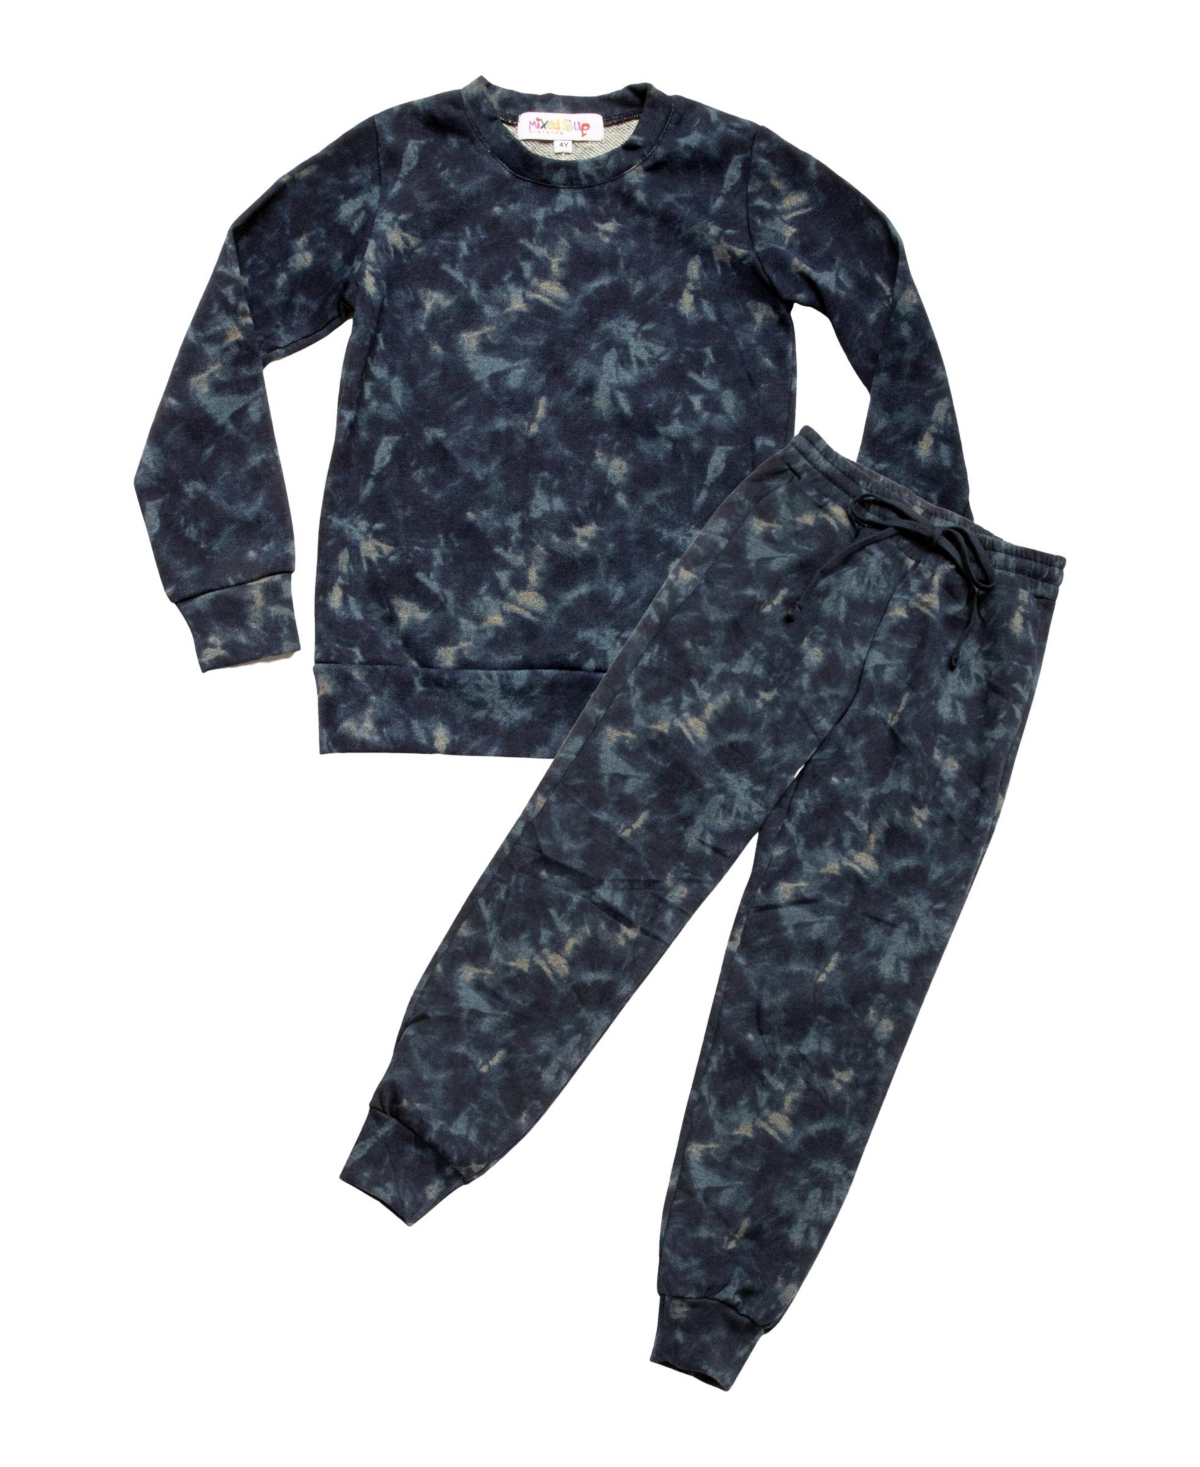 Mixed Up Clothing Toddler Boys Easy Pull-on Sweatpants Joggers And Sweatshirt In Navy Tie-dye